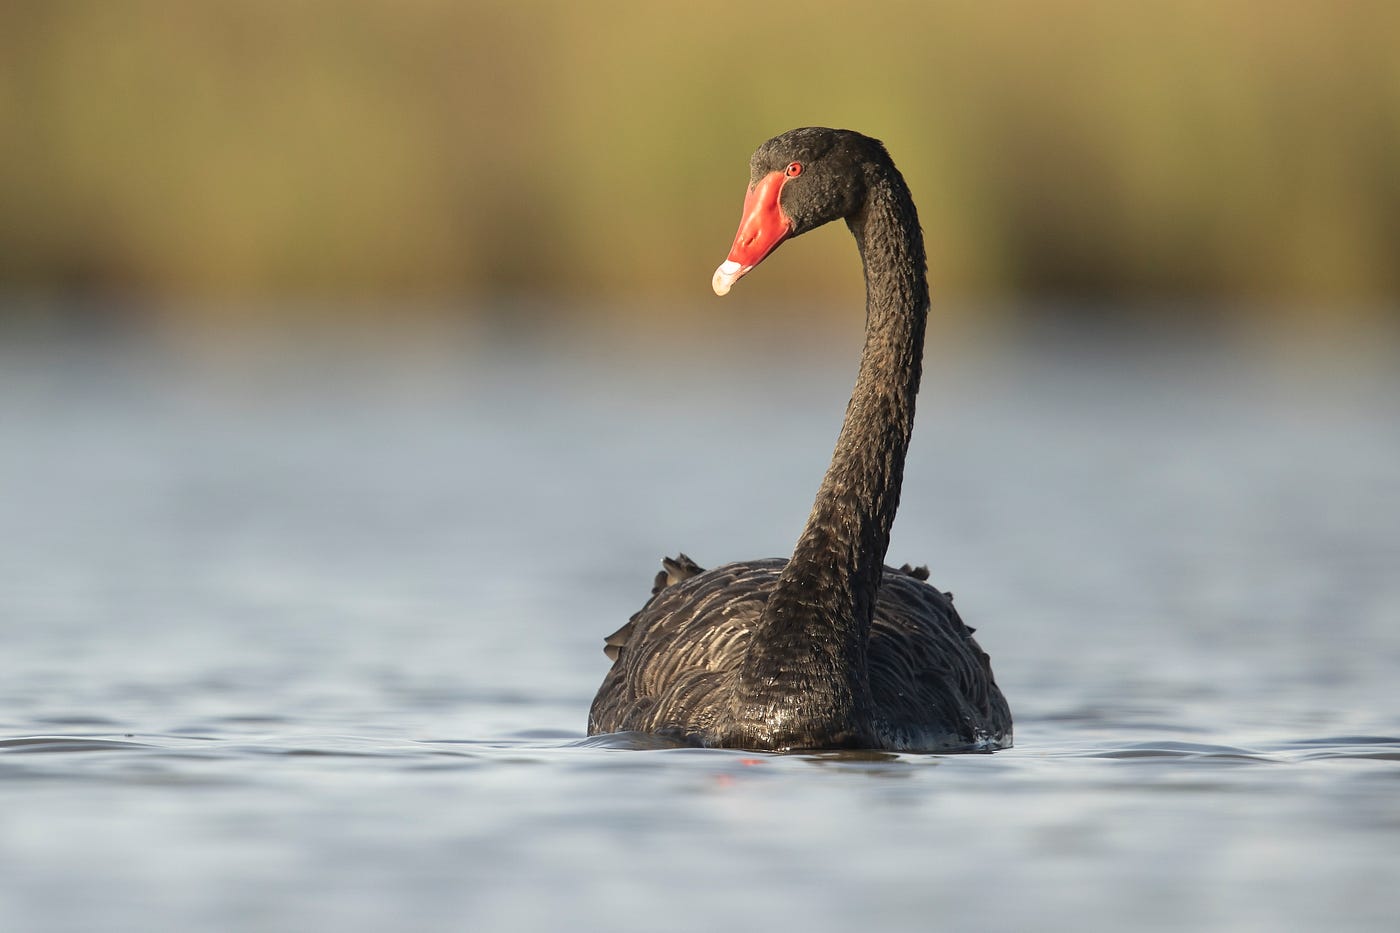 Summary and Critique of “The Black Swan” | by Mark Looi